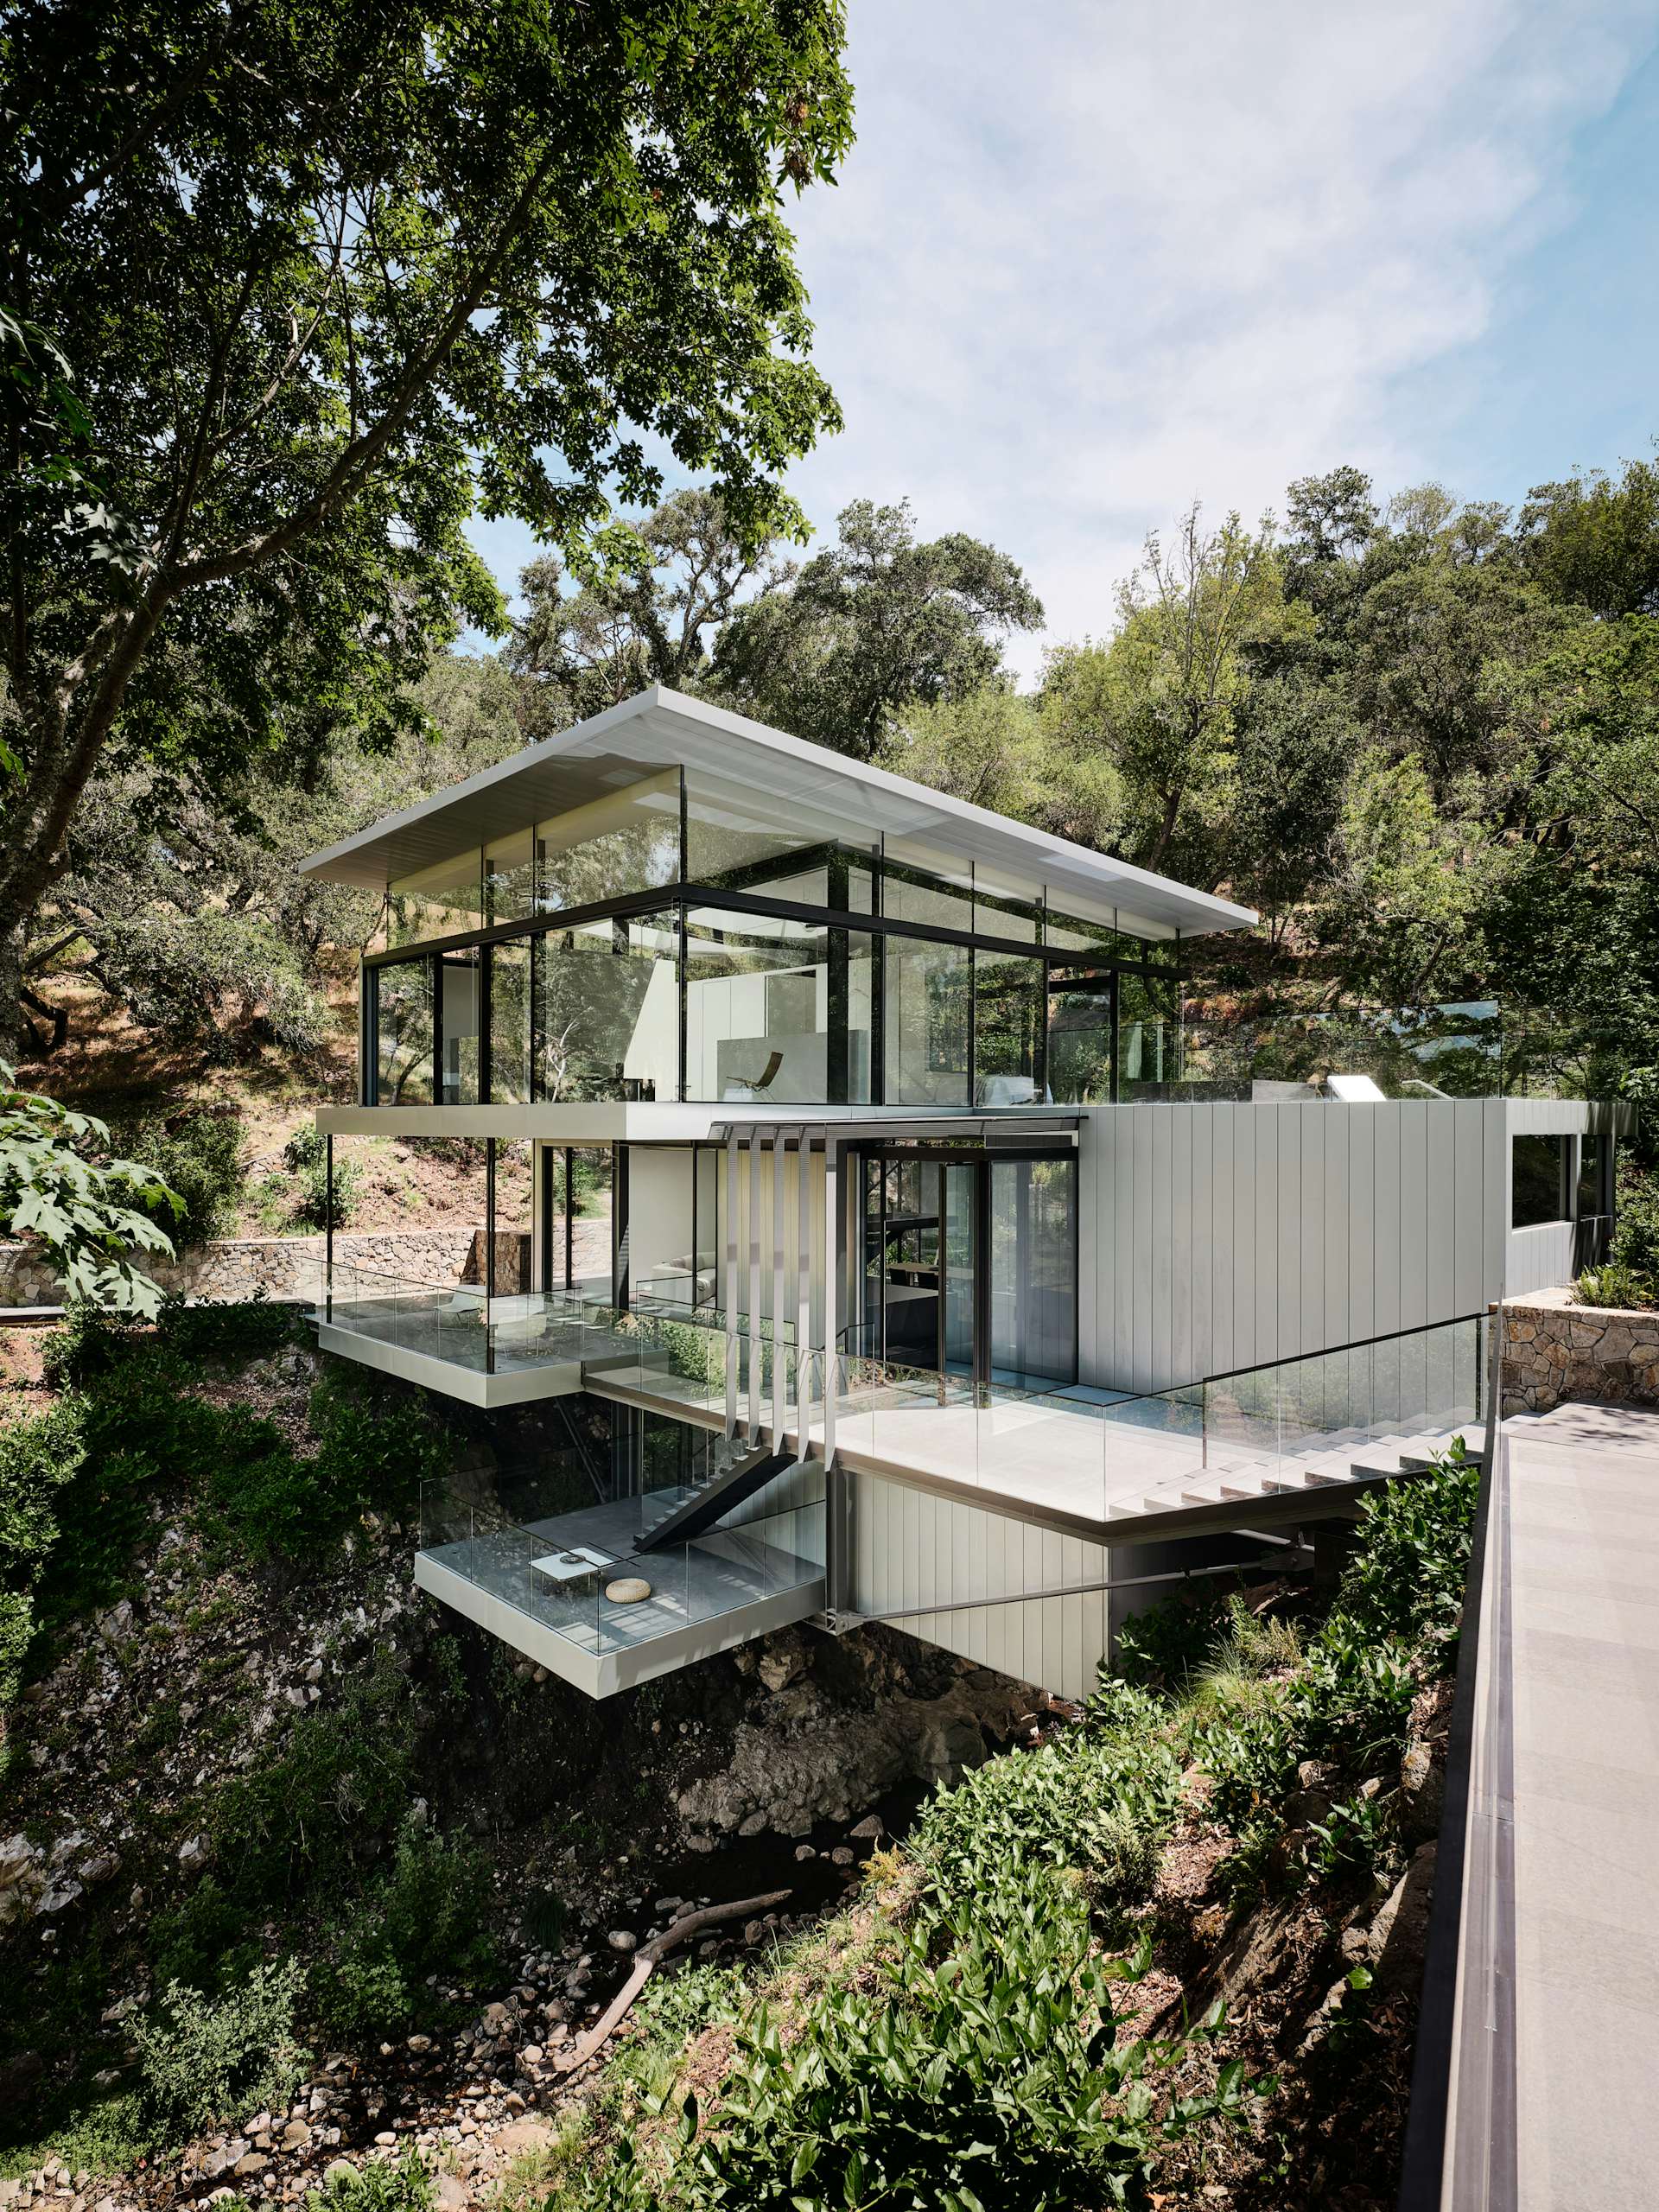 Photo 3 of 34 in This See-Through California Home Magically Hangs Above ...